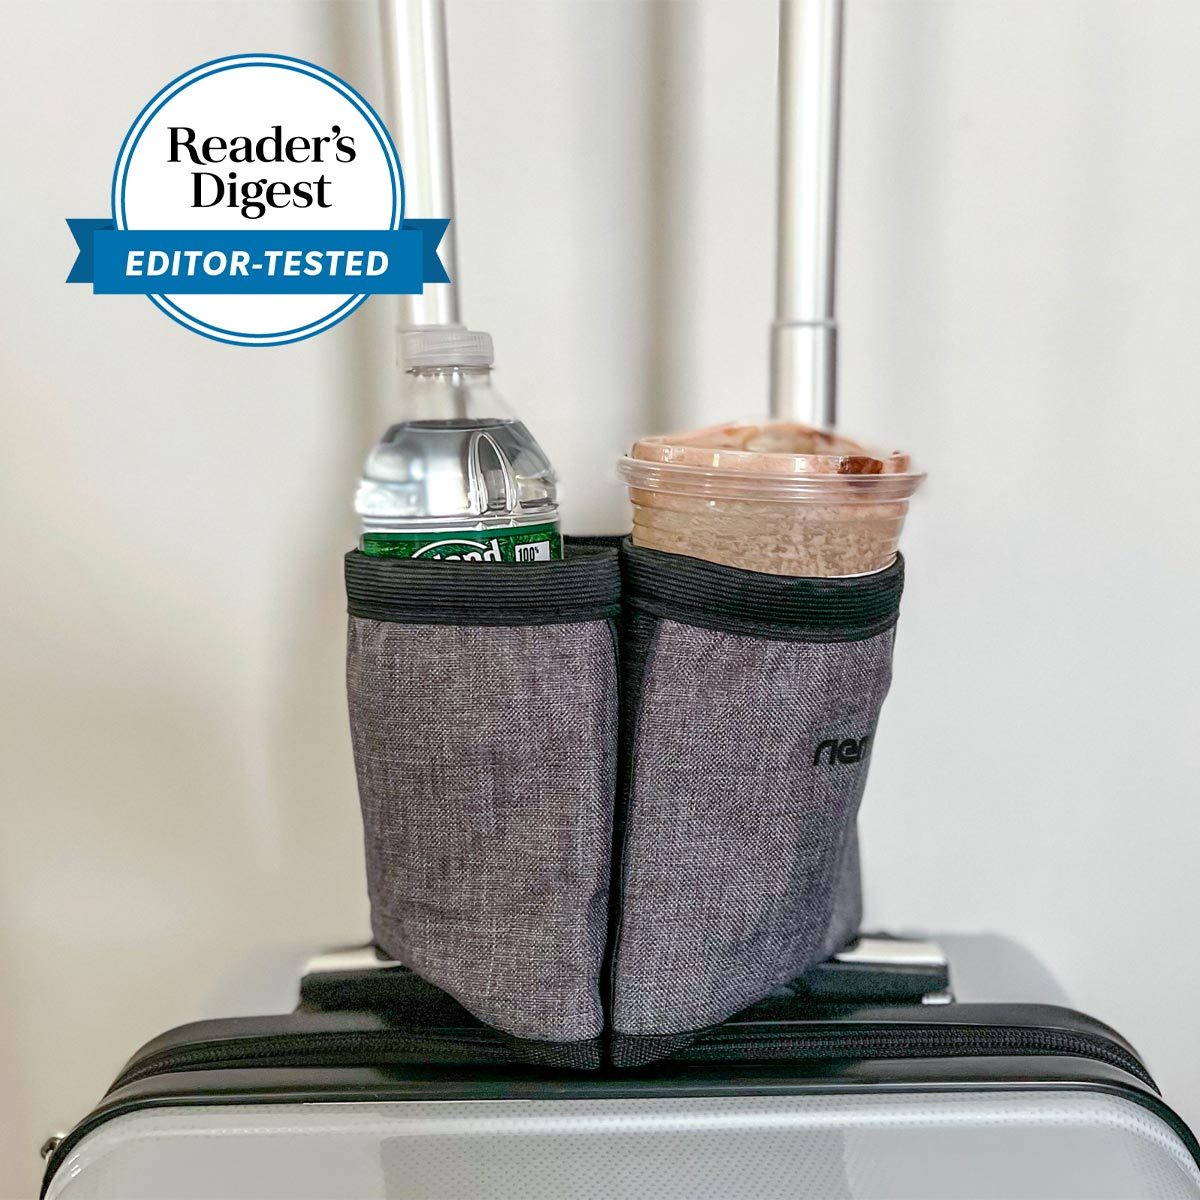 https://www.rd.com/wp-content/uploads/2023/03/RD-Editor-Tested-Square_RD-luggage-drink-holder-stephanie-hope-JVcrop.jpg?fit=700%2C1024